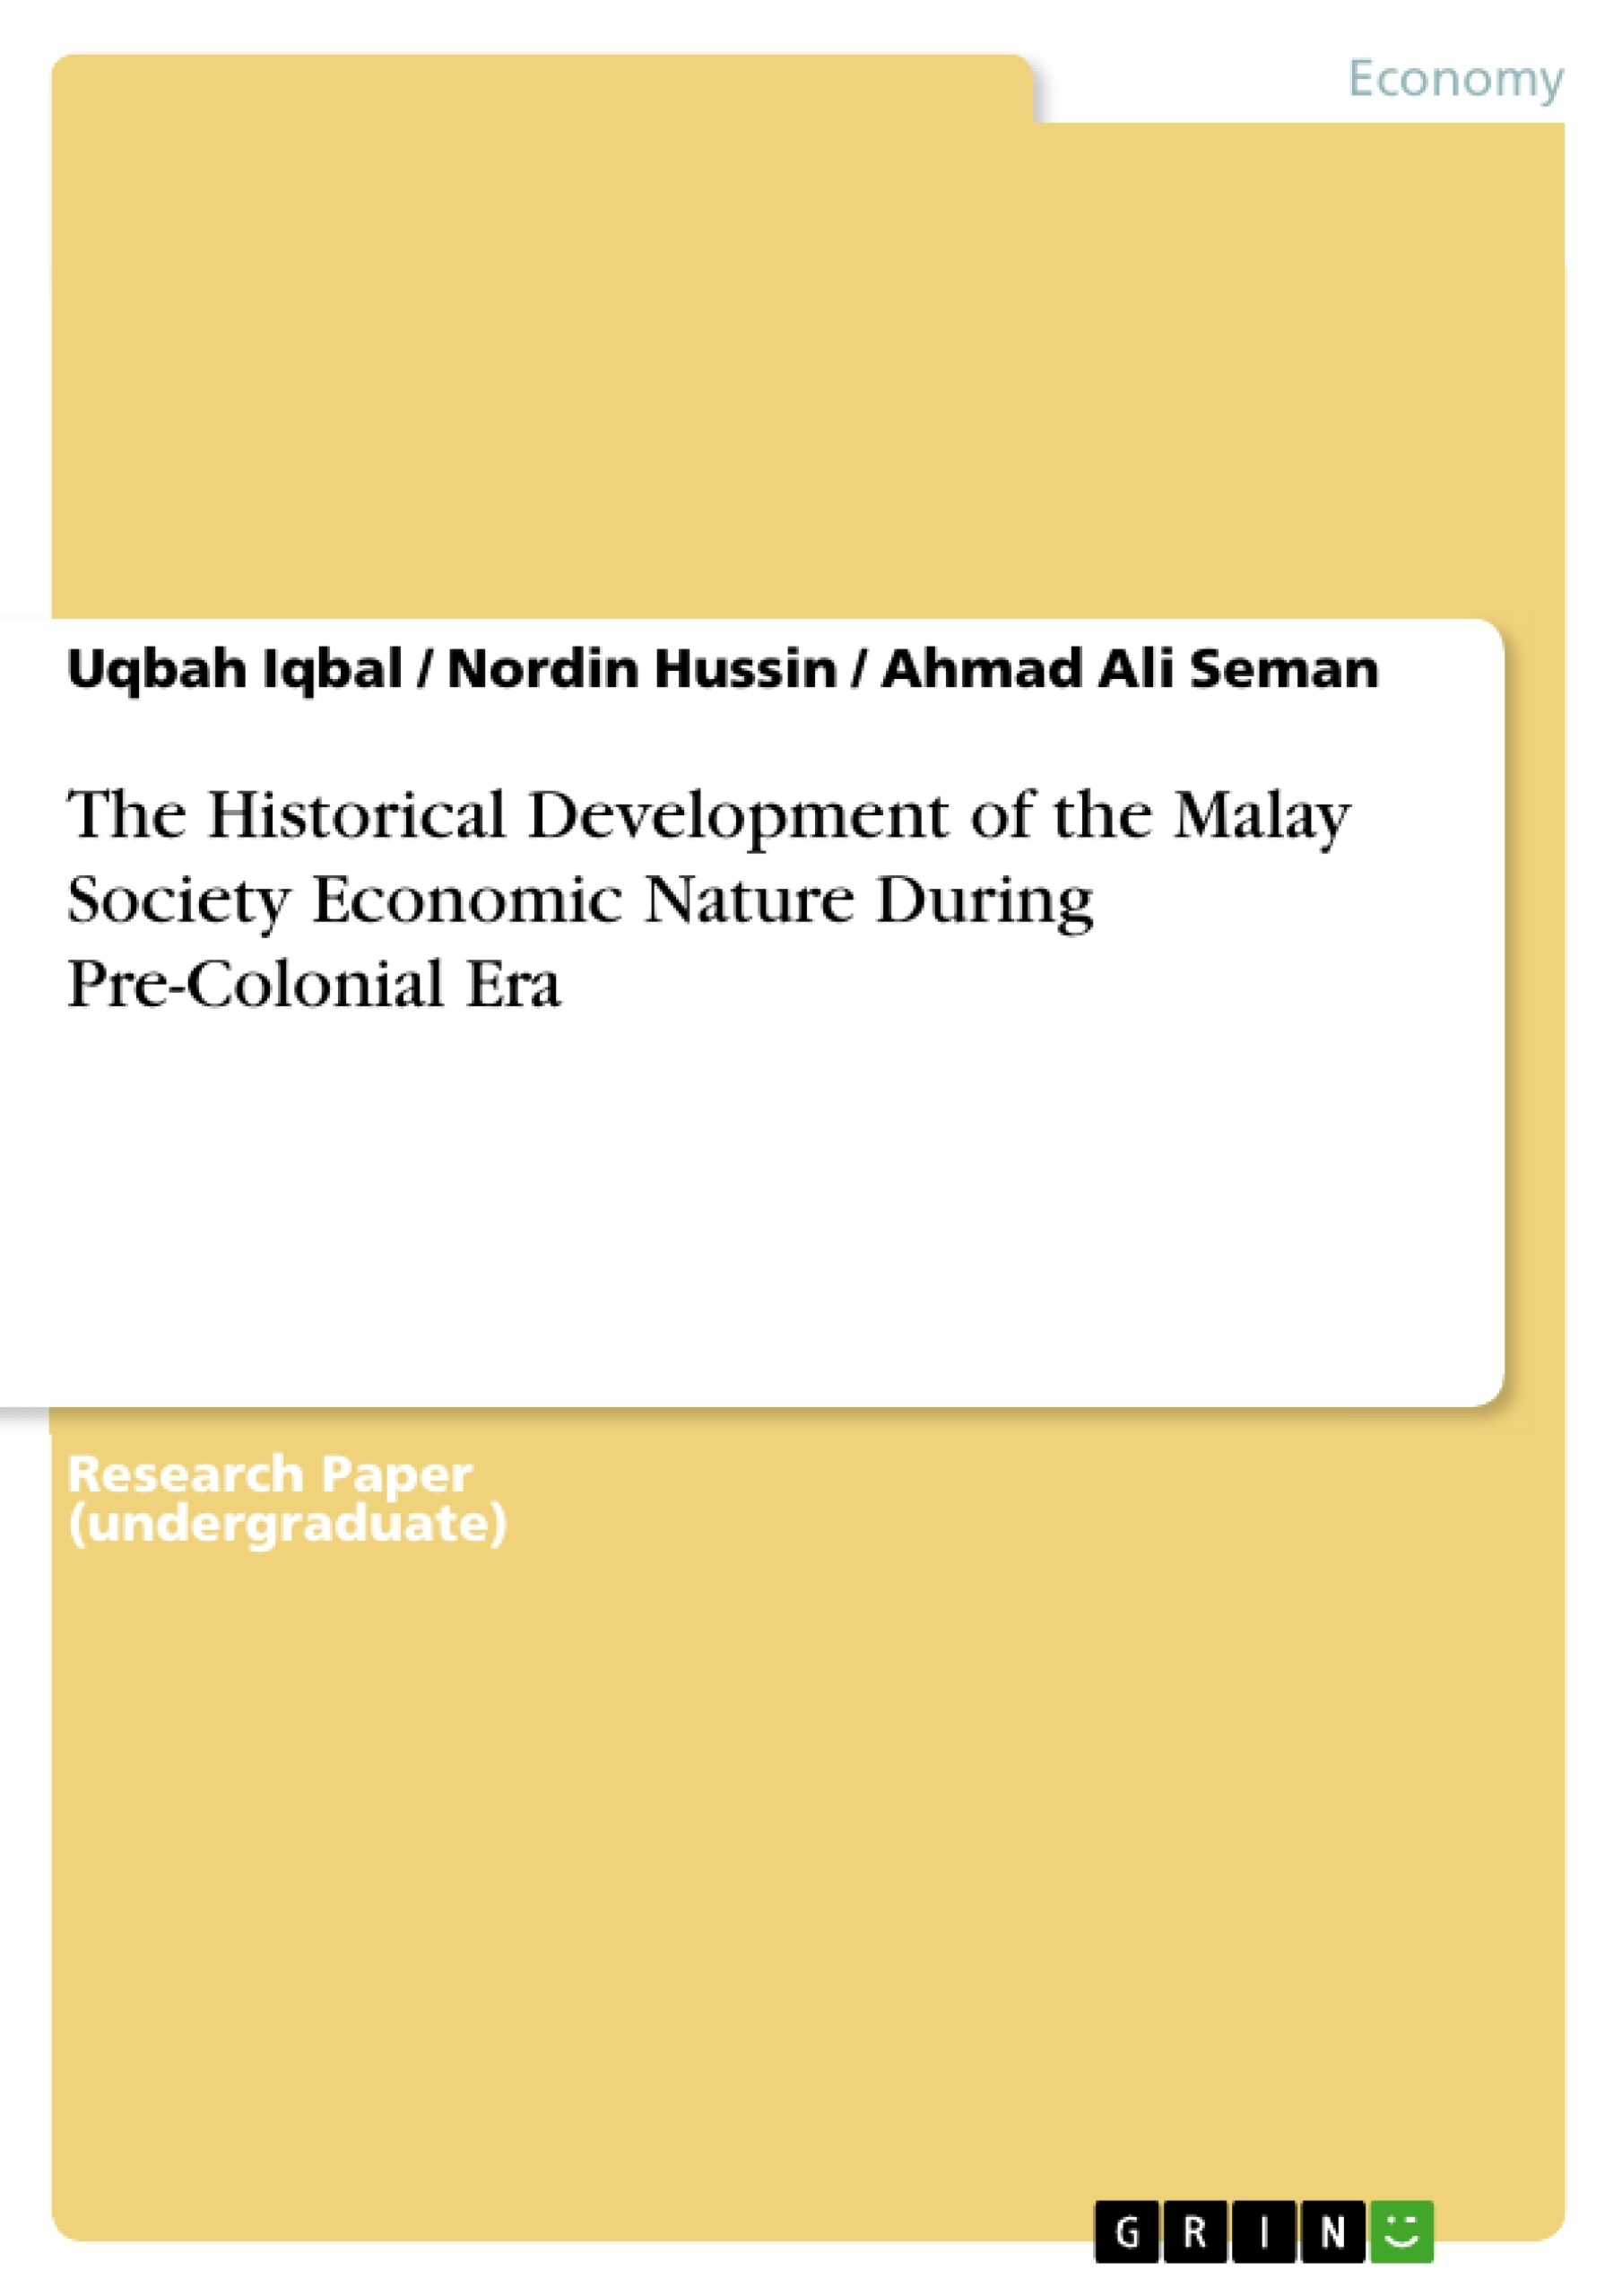 Title: The Historical Development of the Malay Society Economic Nature During Pre-Colonial Era